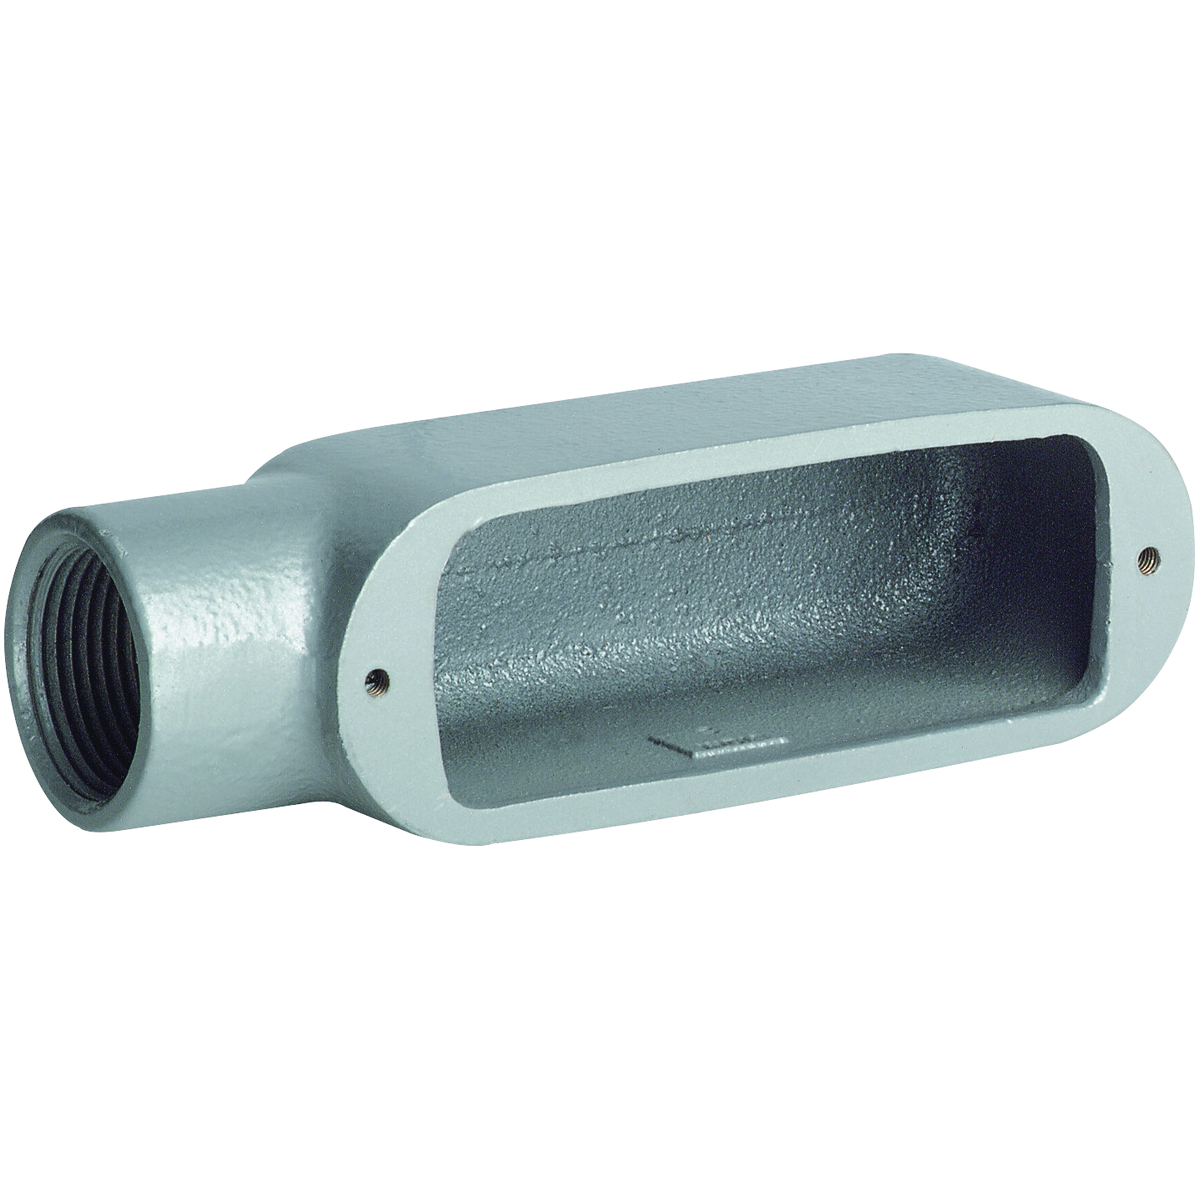 O SERIES/DURALOY 5 SERIES - ALUMINUM CONDUIT BODY - E TYPE - HUB SIZE 1INCH - VOLUME 12.0 CUBIC INCHES